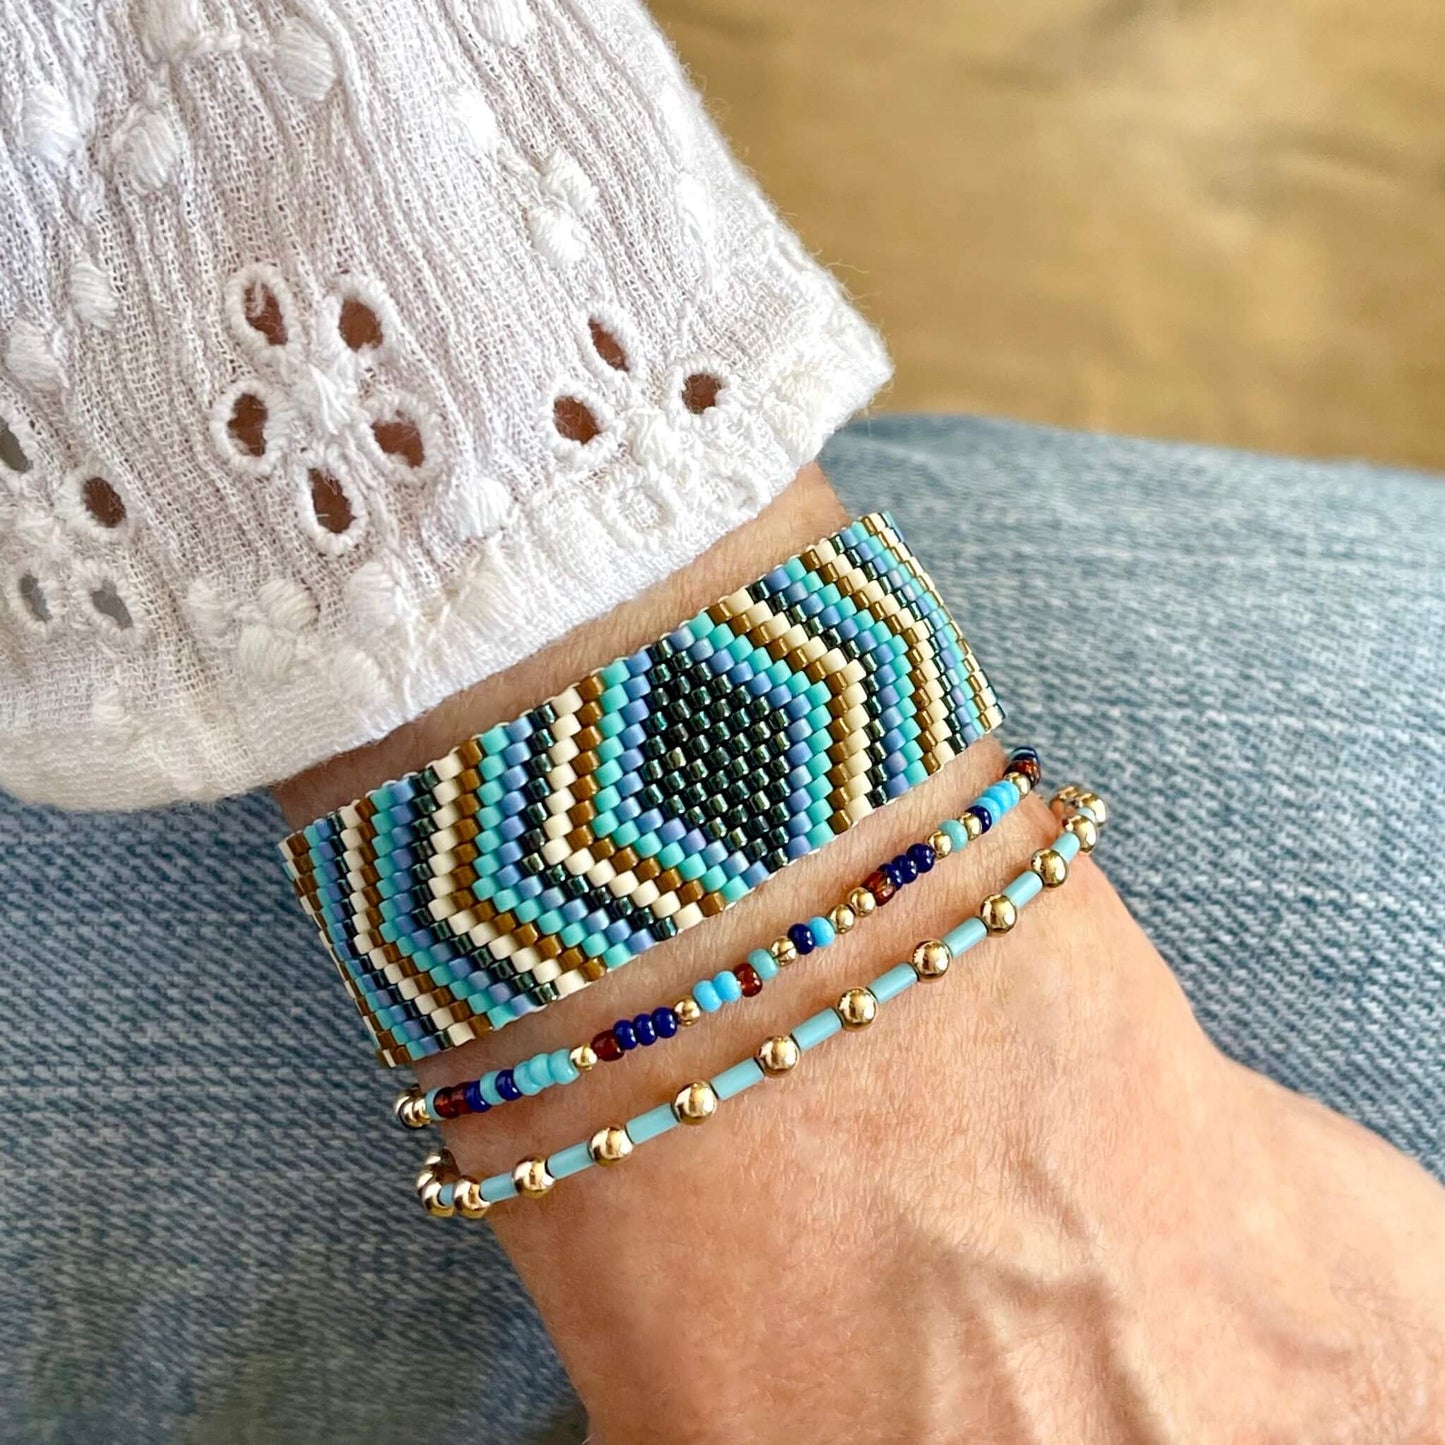 Beaded wide woven and stretch bracelet stack of 3. Handmade with blue, turquoise and brown seed beads and 14K gold filled round beads.